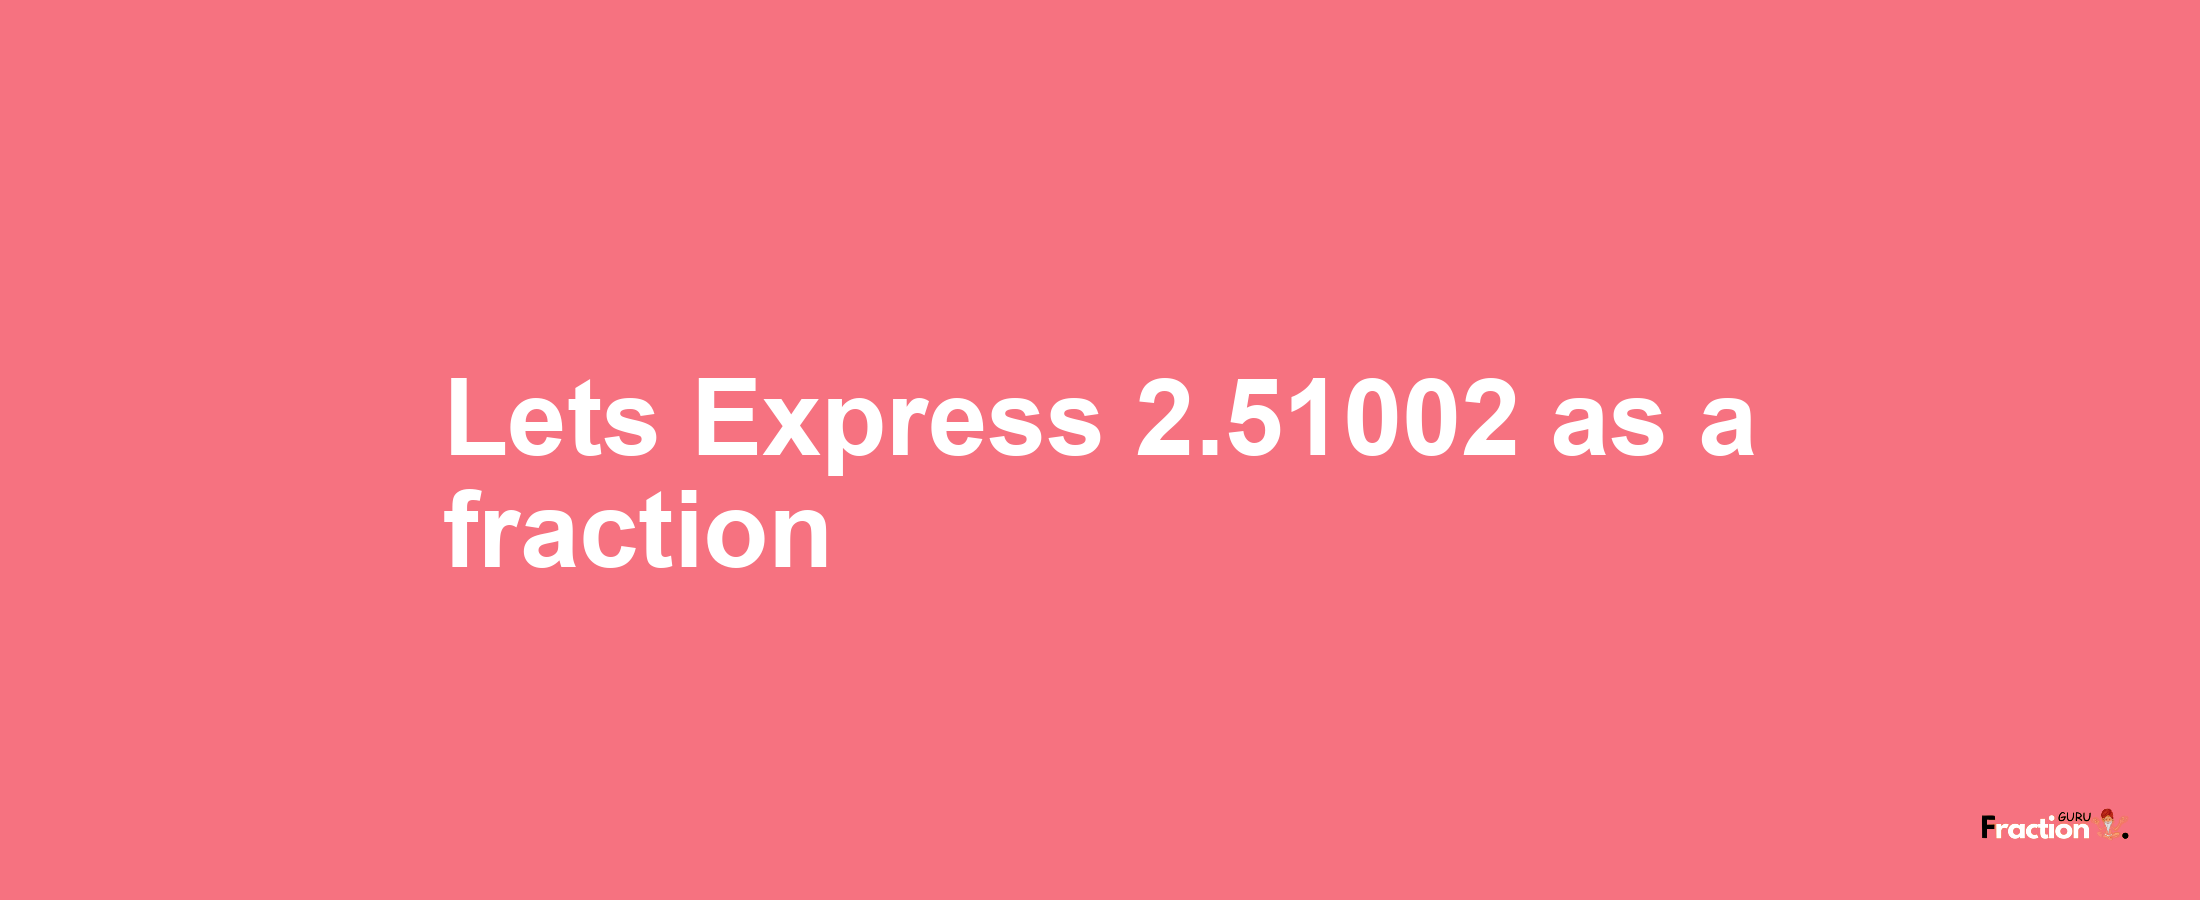 Lets Express 2.51002 as afraction